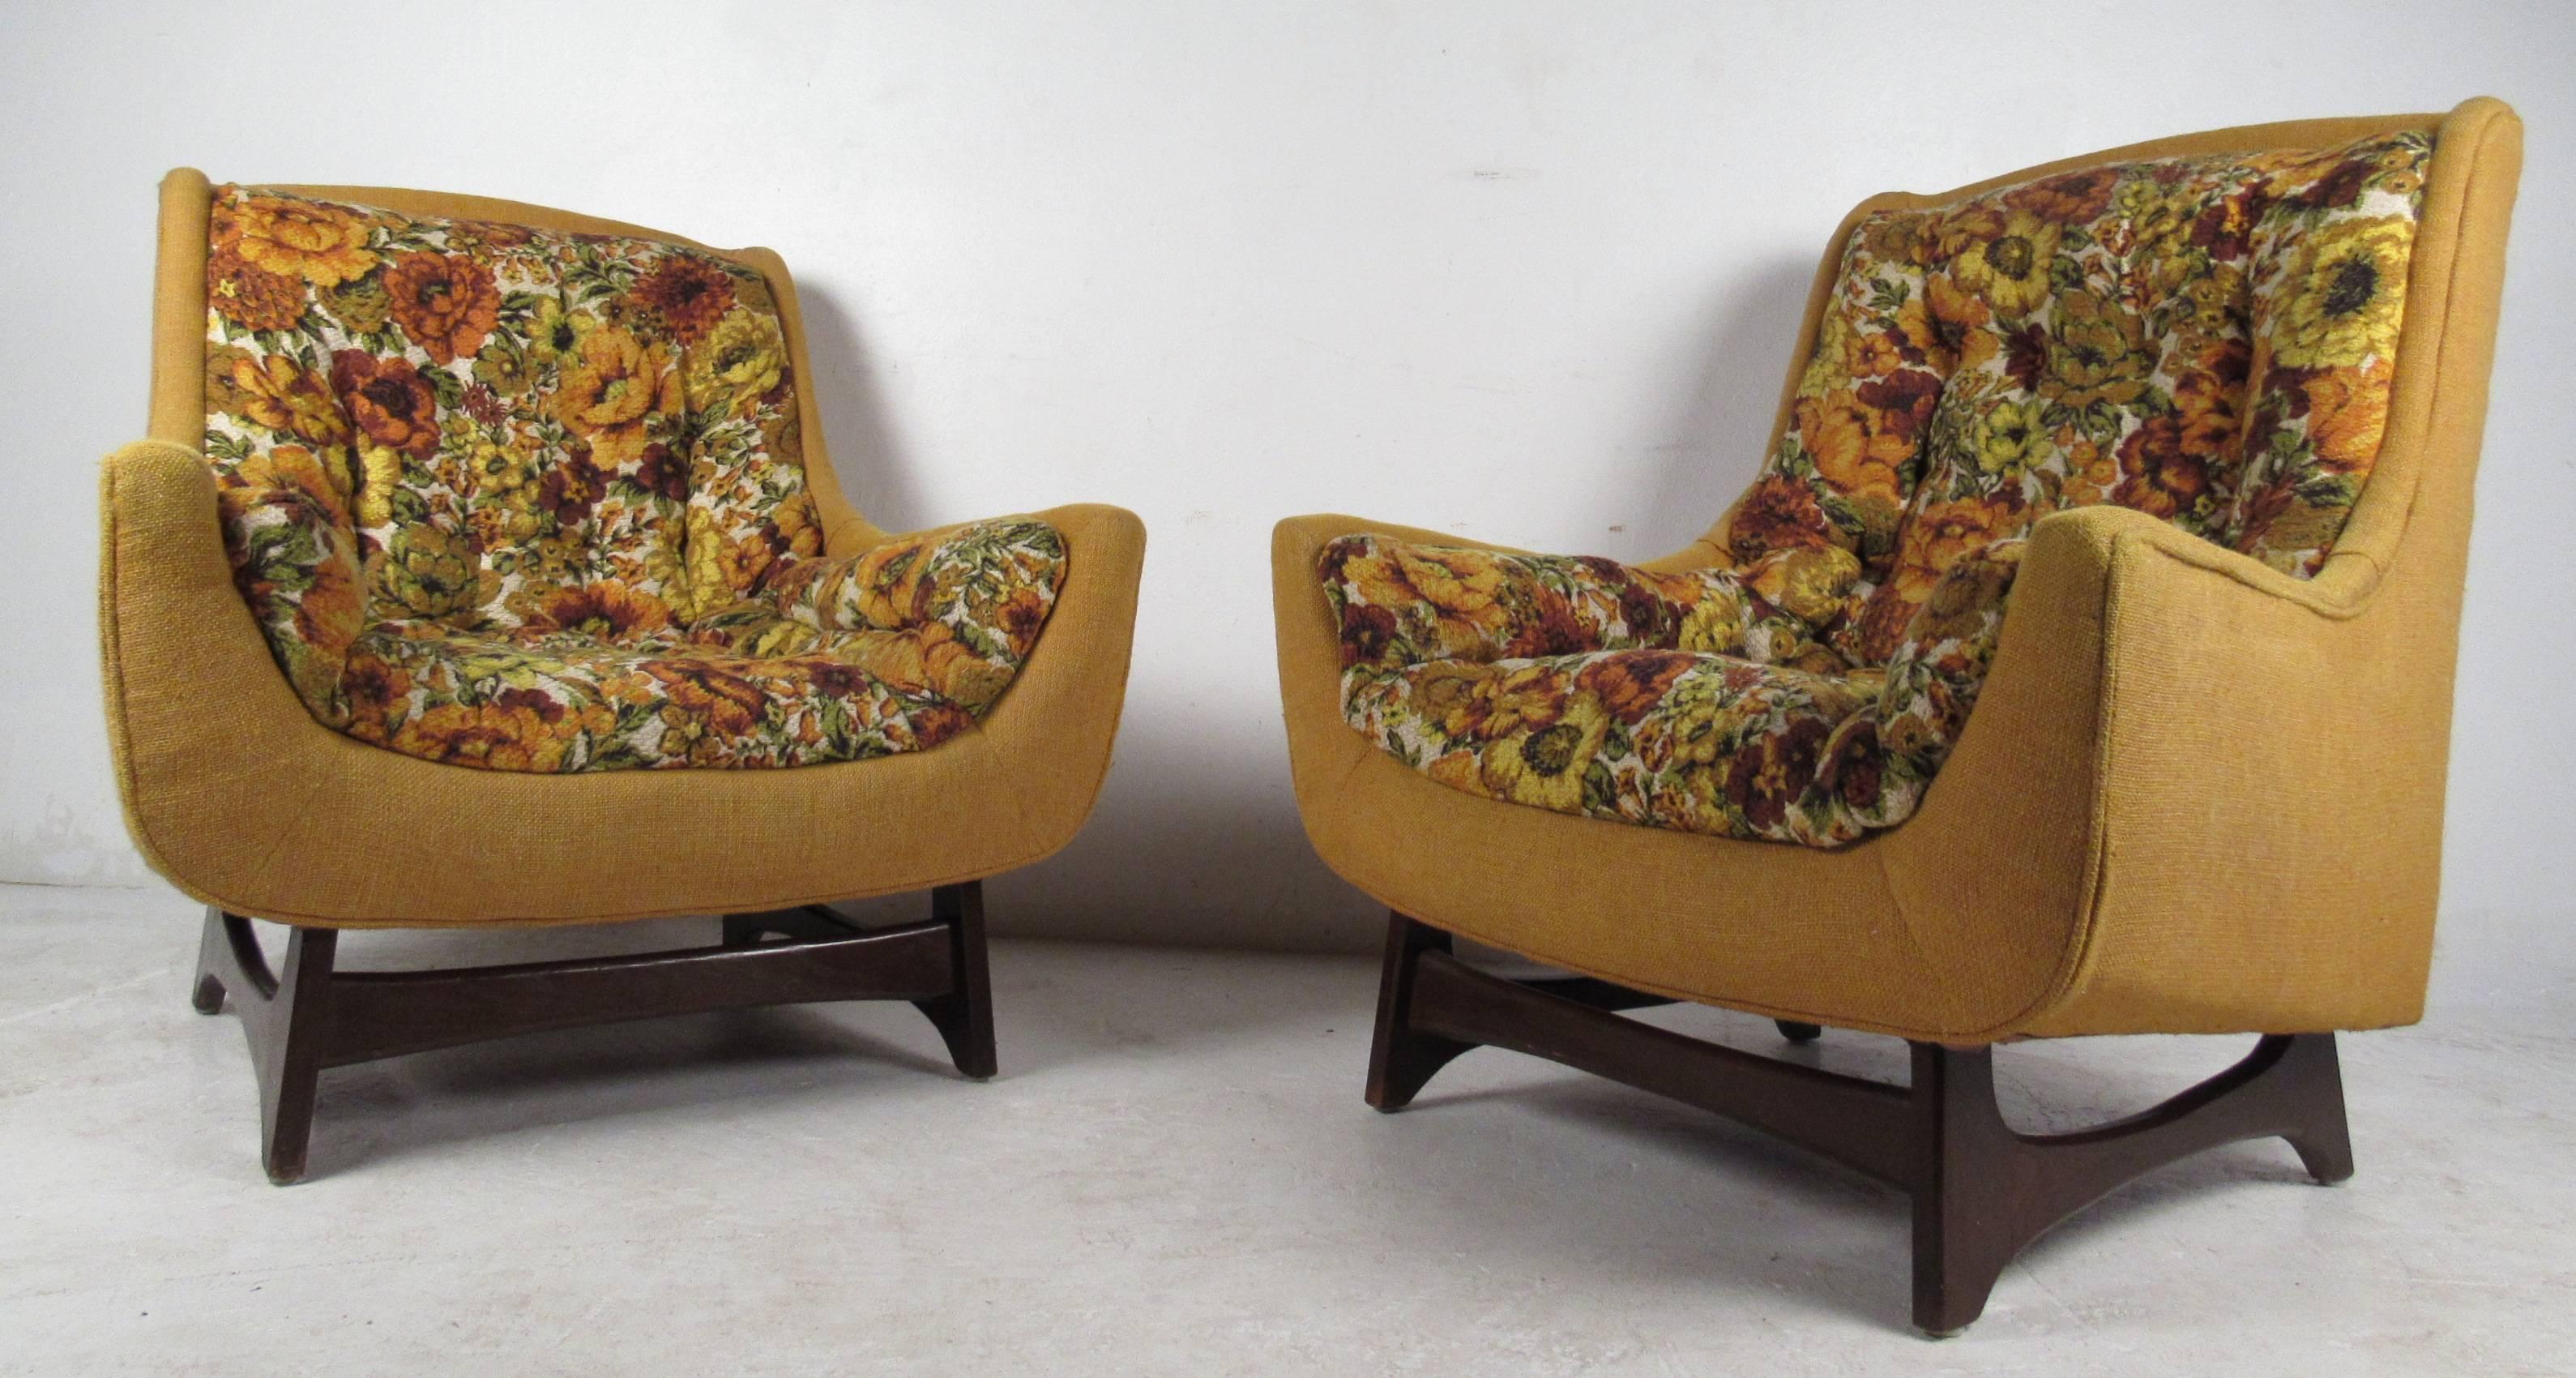 20th Century Mid-Century Modern His and Her Style Lounge Chairs